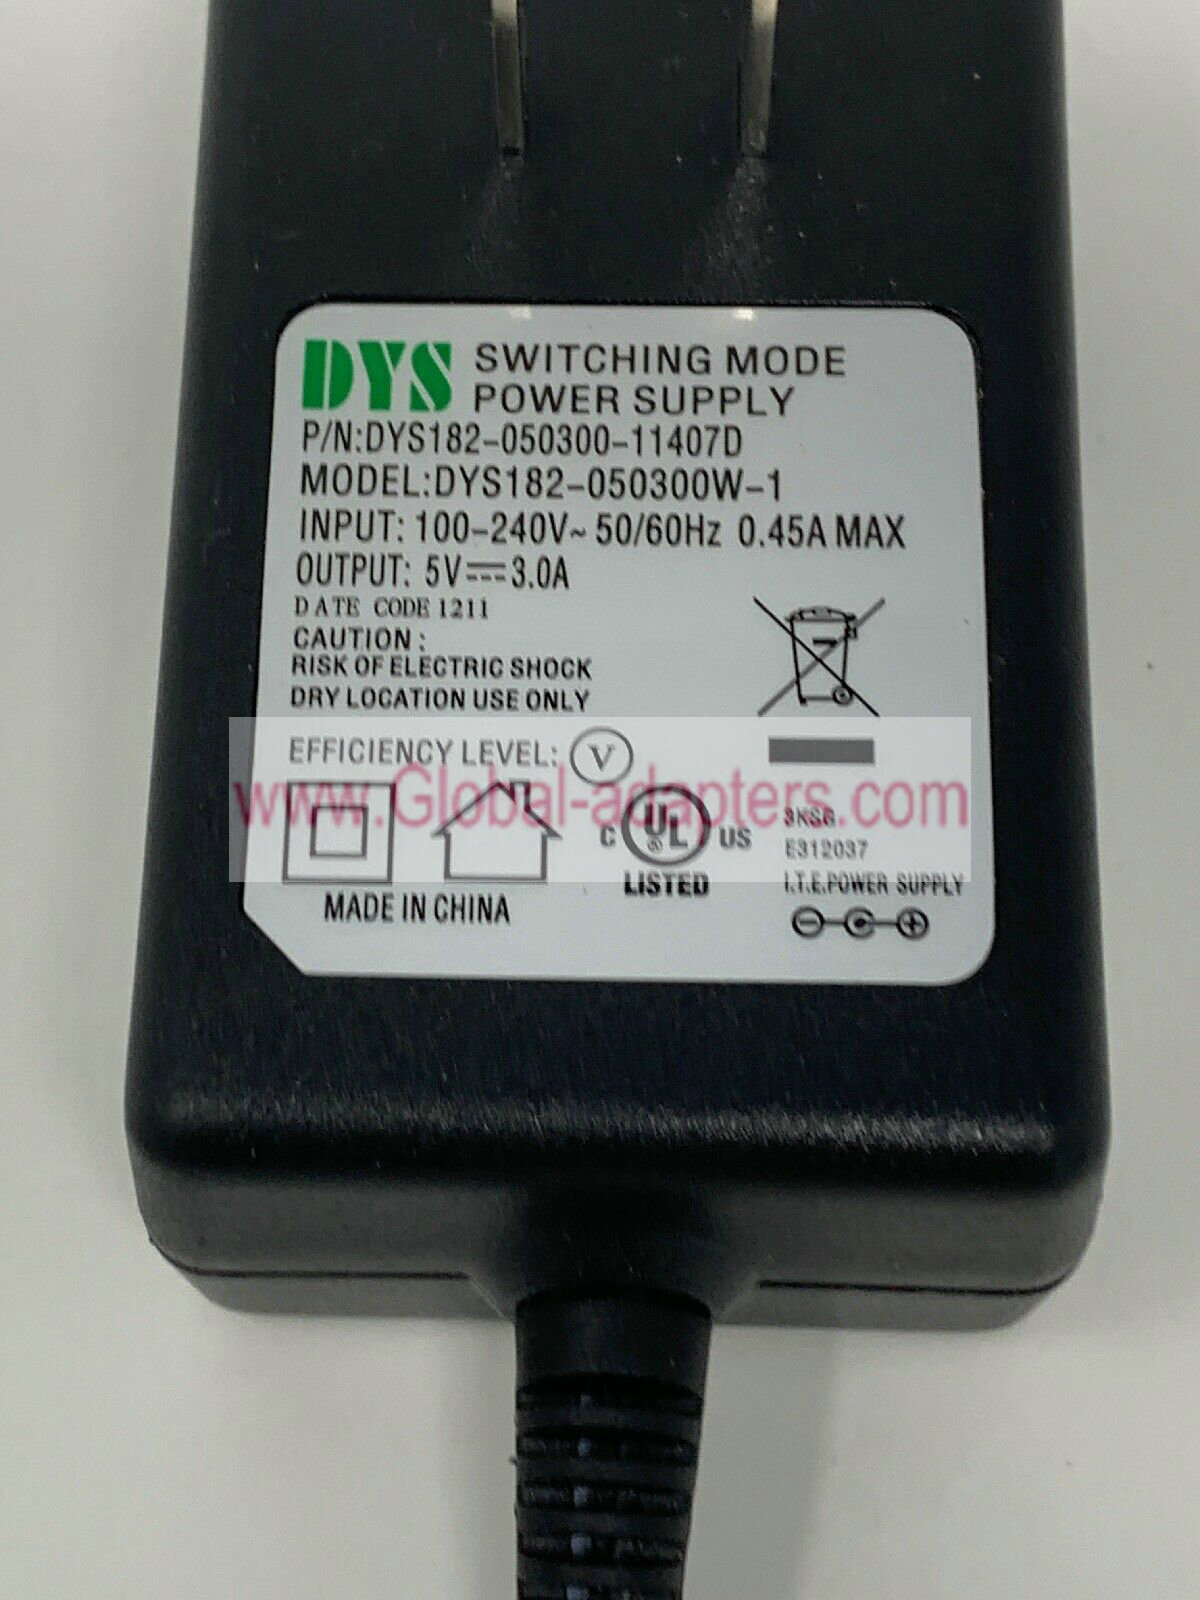 New 5V 3.0A Wall ac adapter for DYS DYS182-050300W-1 DYS182-050300-11407D Switching Mode Power Suppl